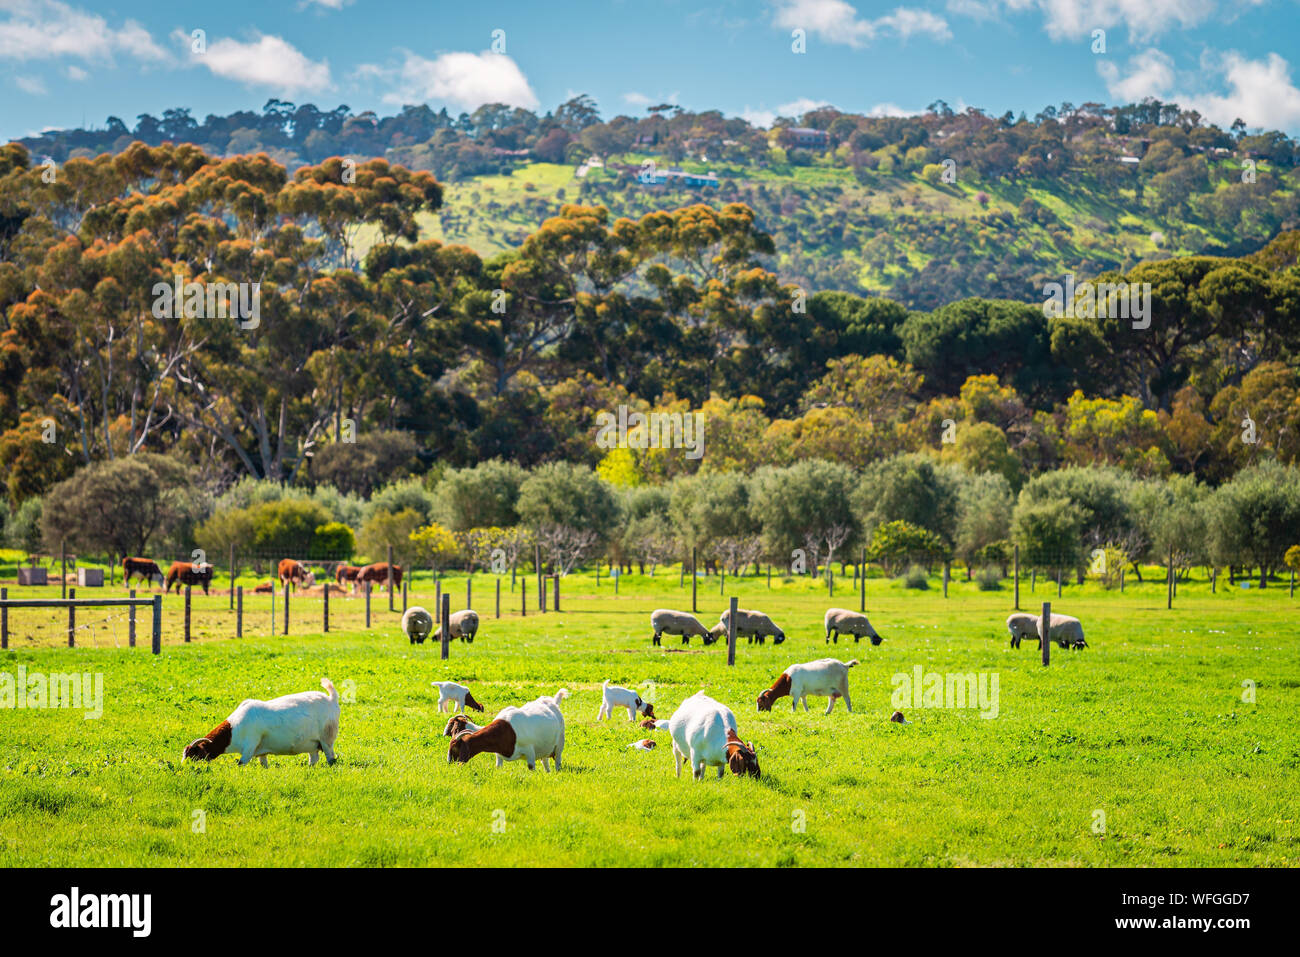 Goats and sheep grazing on a daily farm in rural South Australia during winter season Stock Photo